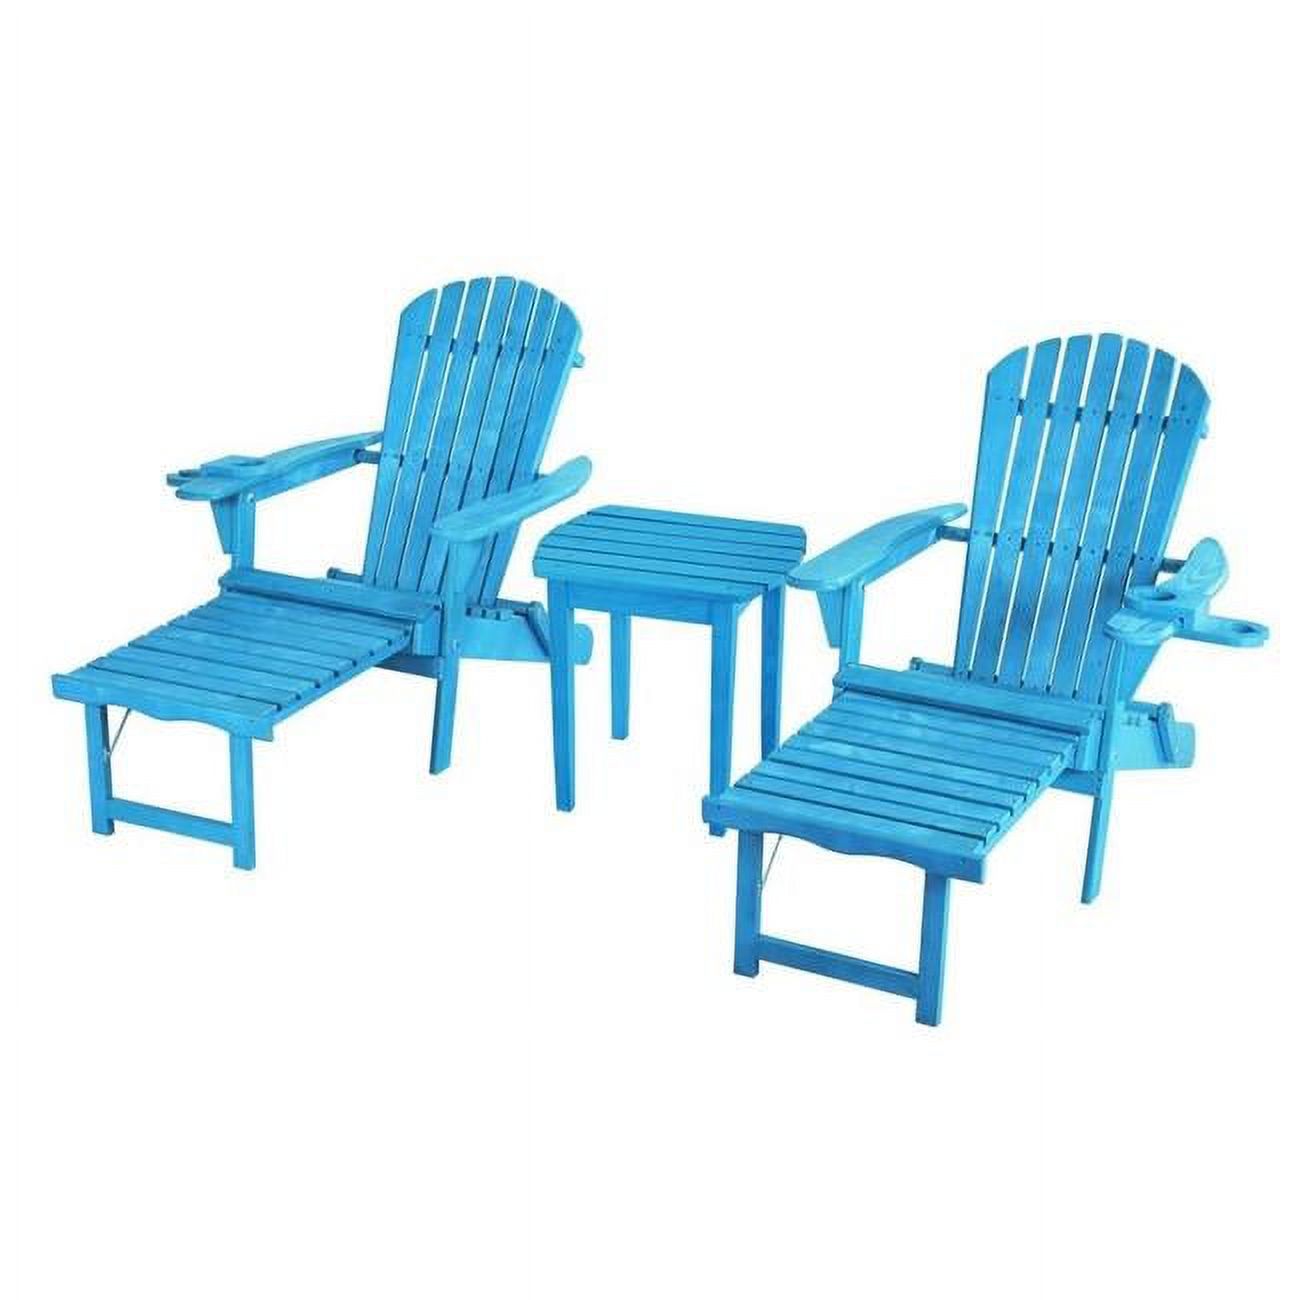 W Unlimited  Oceanic Adirondack Chaise Foldable Lounge Chair Set with Cup & Glass Holder, Sky Blue - Set of 2 - image 1 of 3